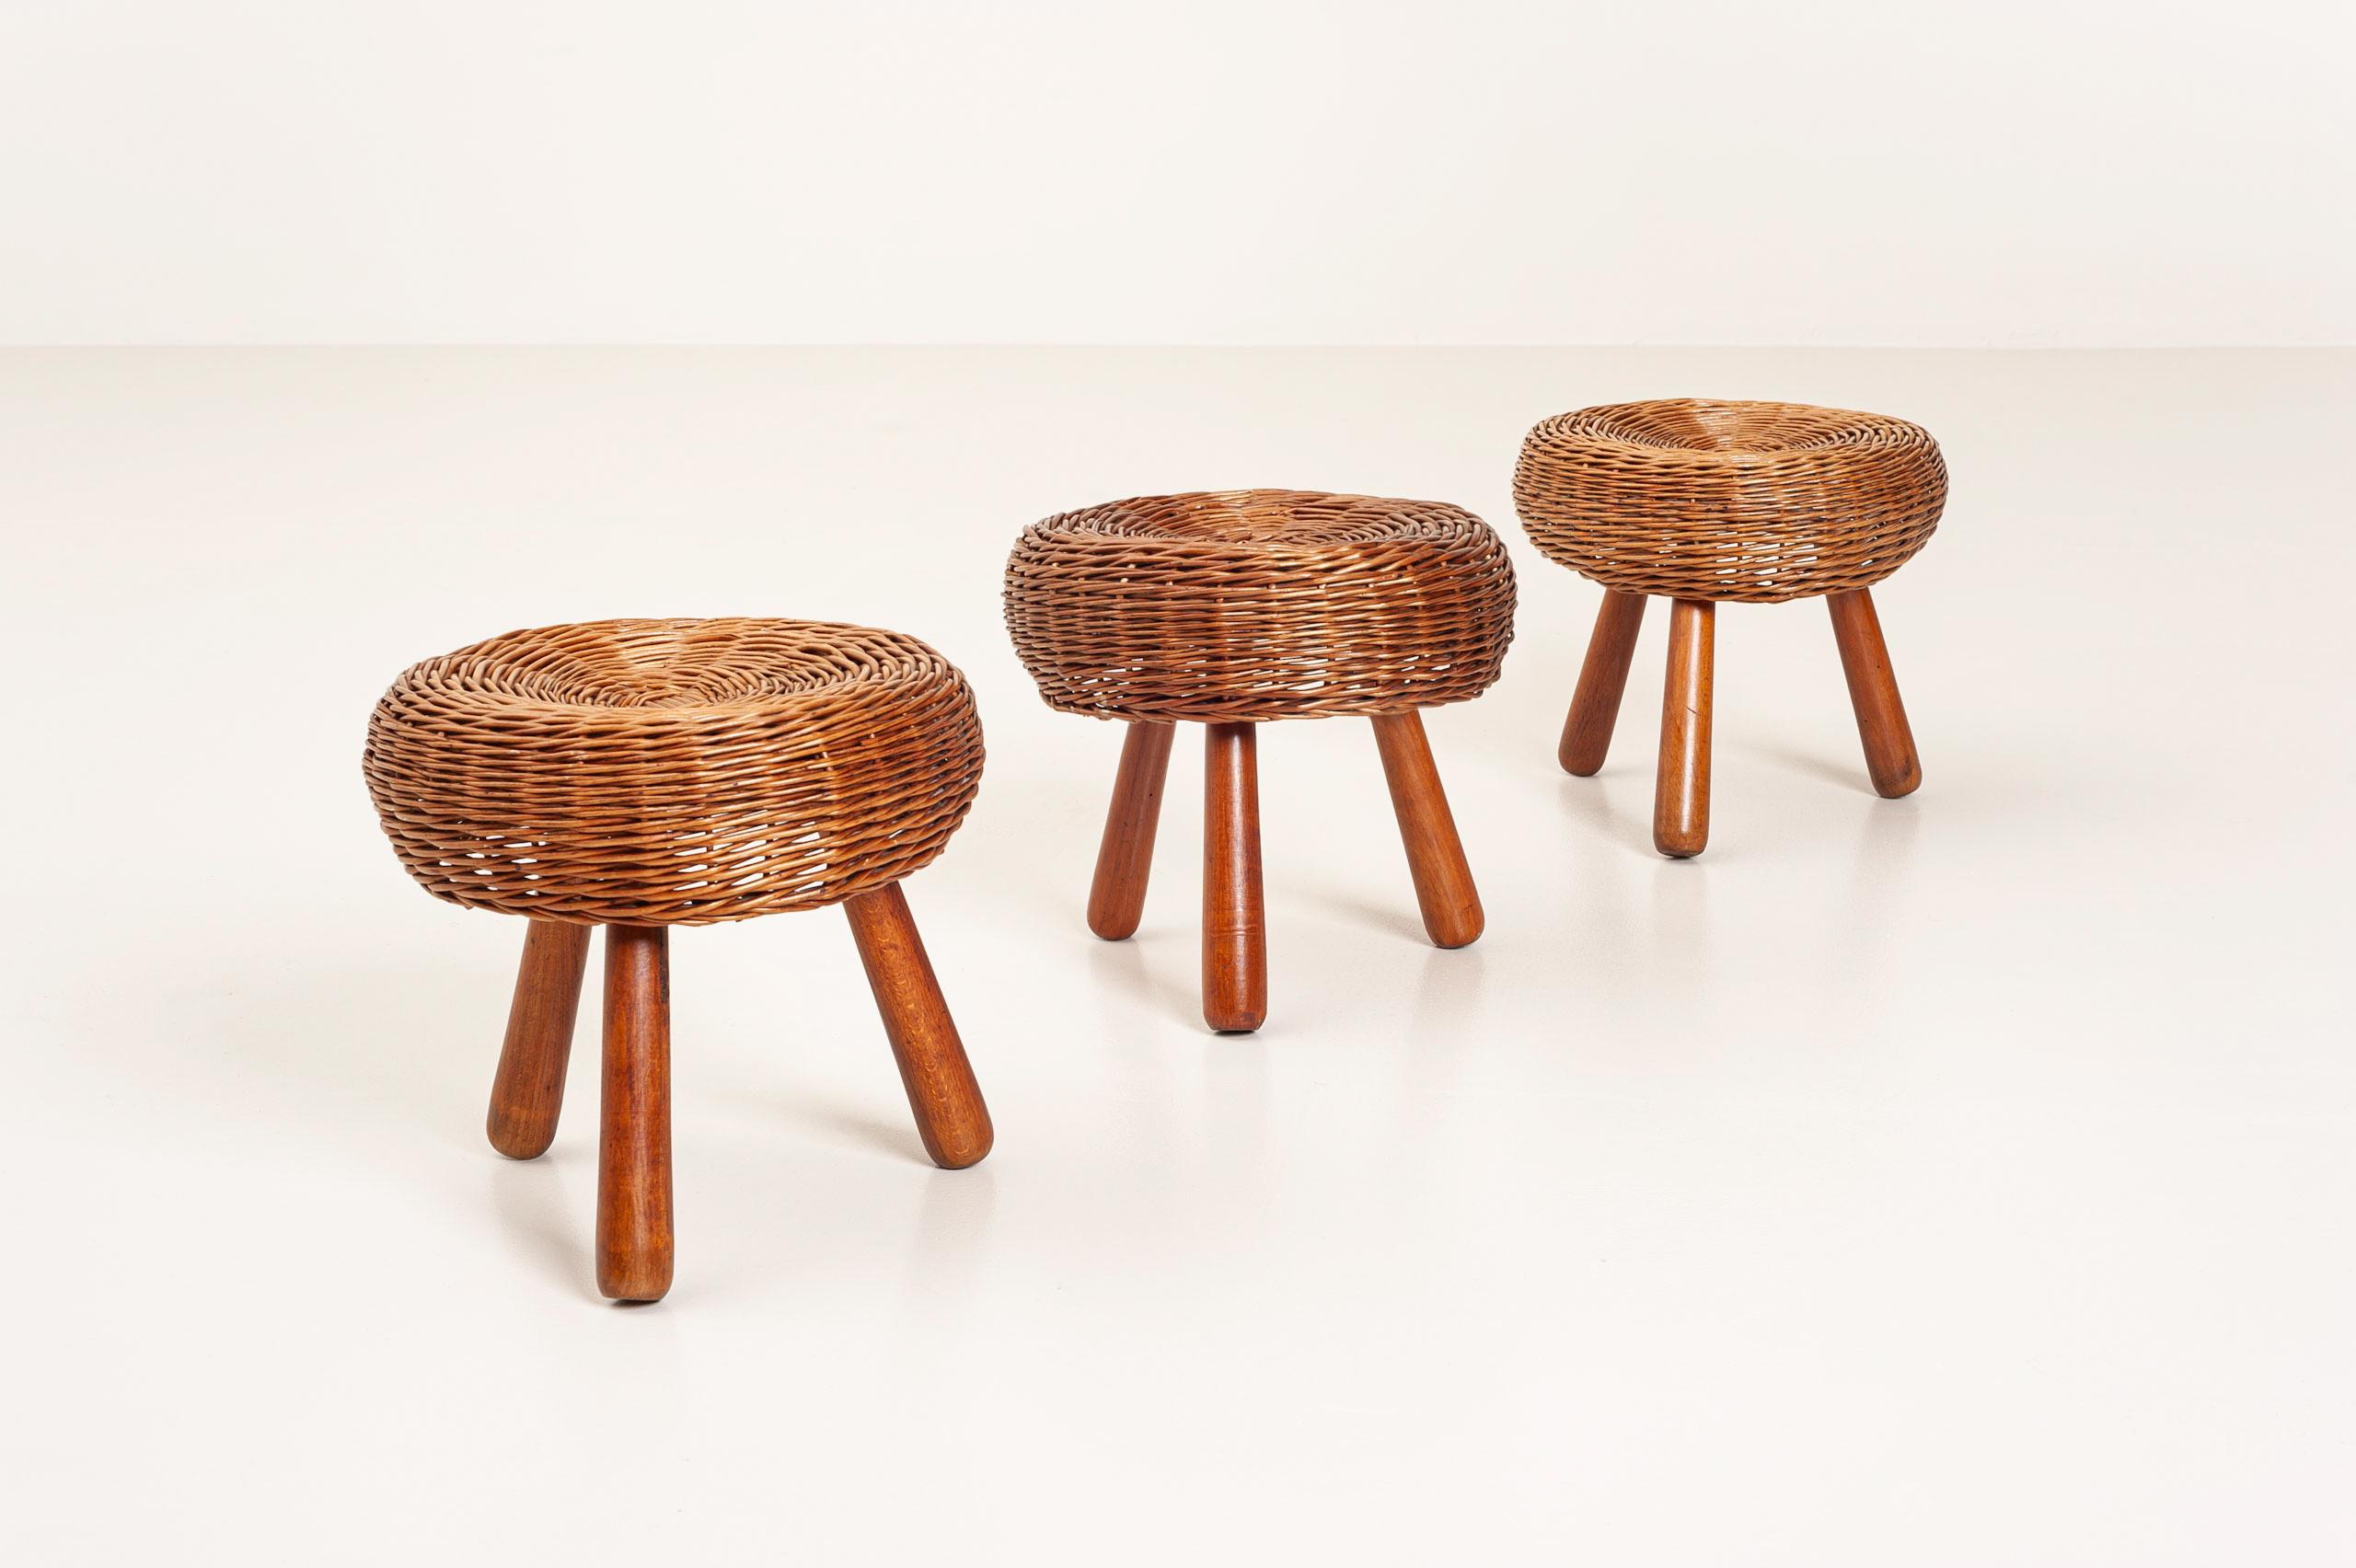 Tony Paul Attributed Low Stools, Woven Wicker, Solid Beech, United States, 1950s For Sale 1